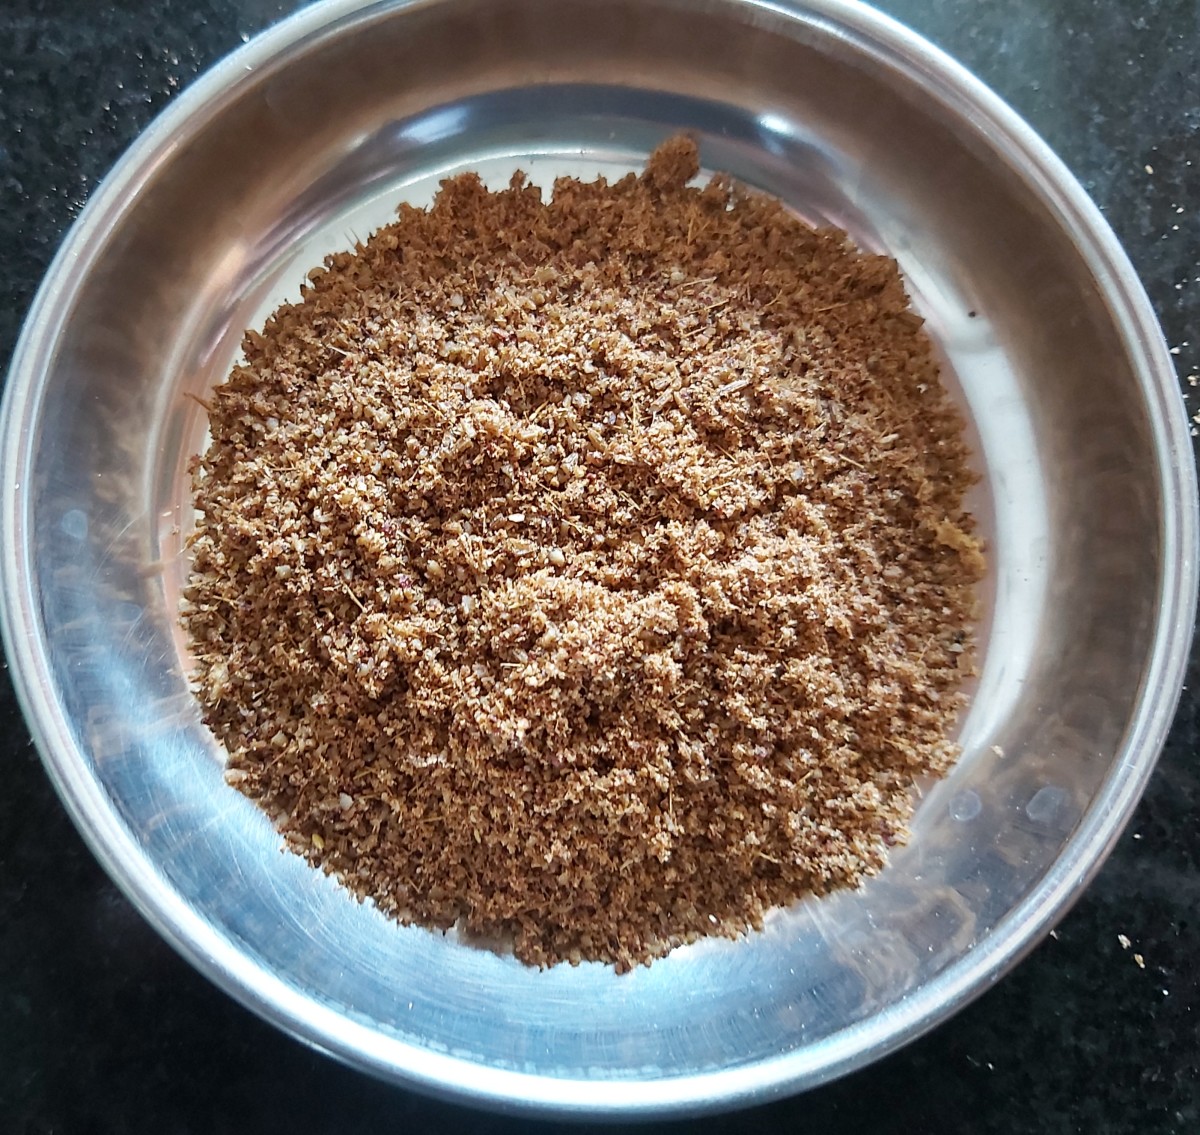 Your pepper rasam powder is ready (you can make this powder ahead of time and store for later use).